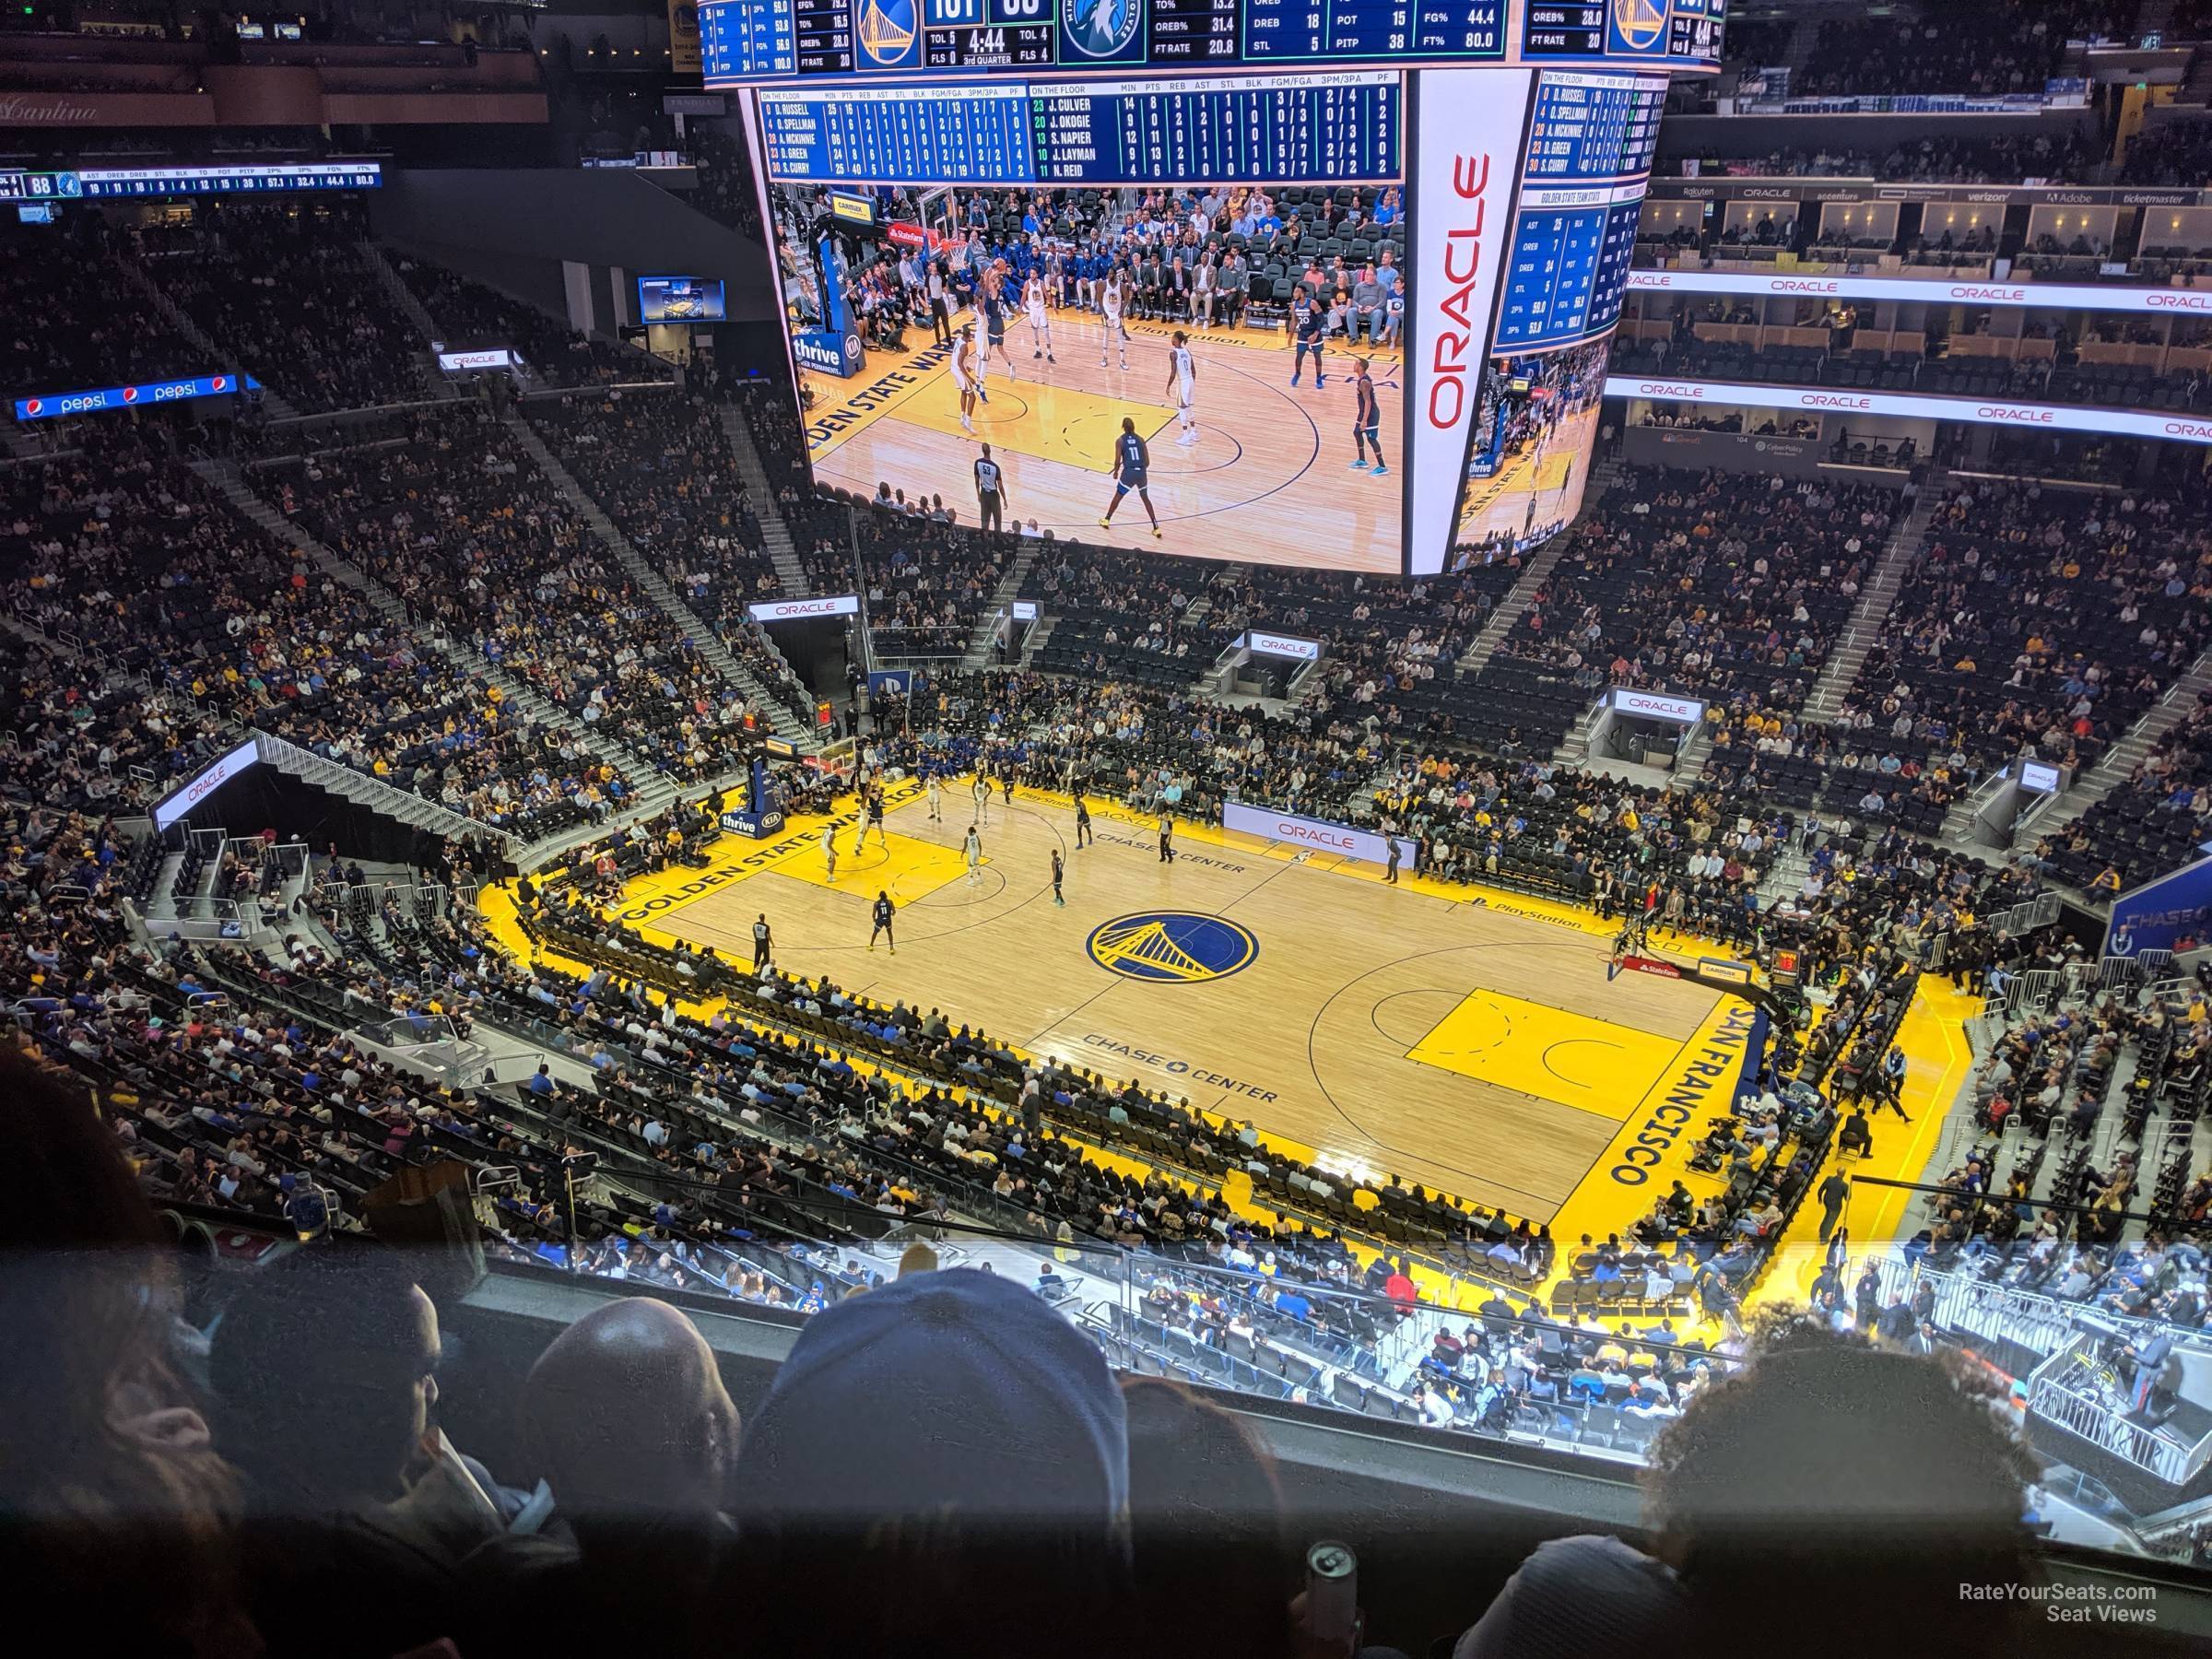 section 218, row 8 seat view  for basketball - chase center